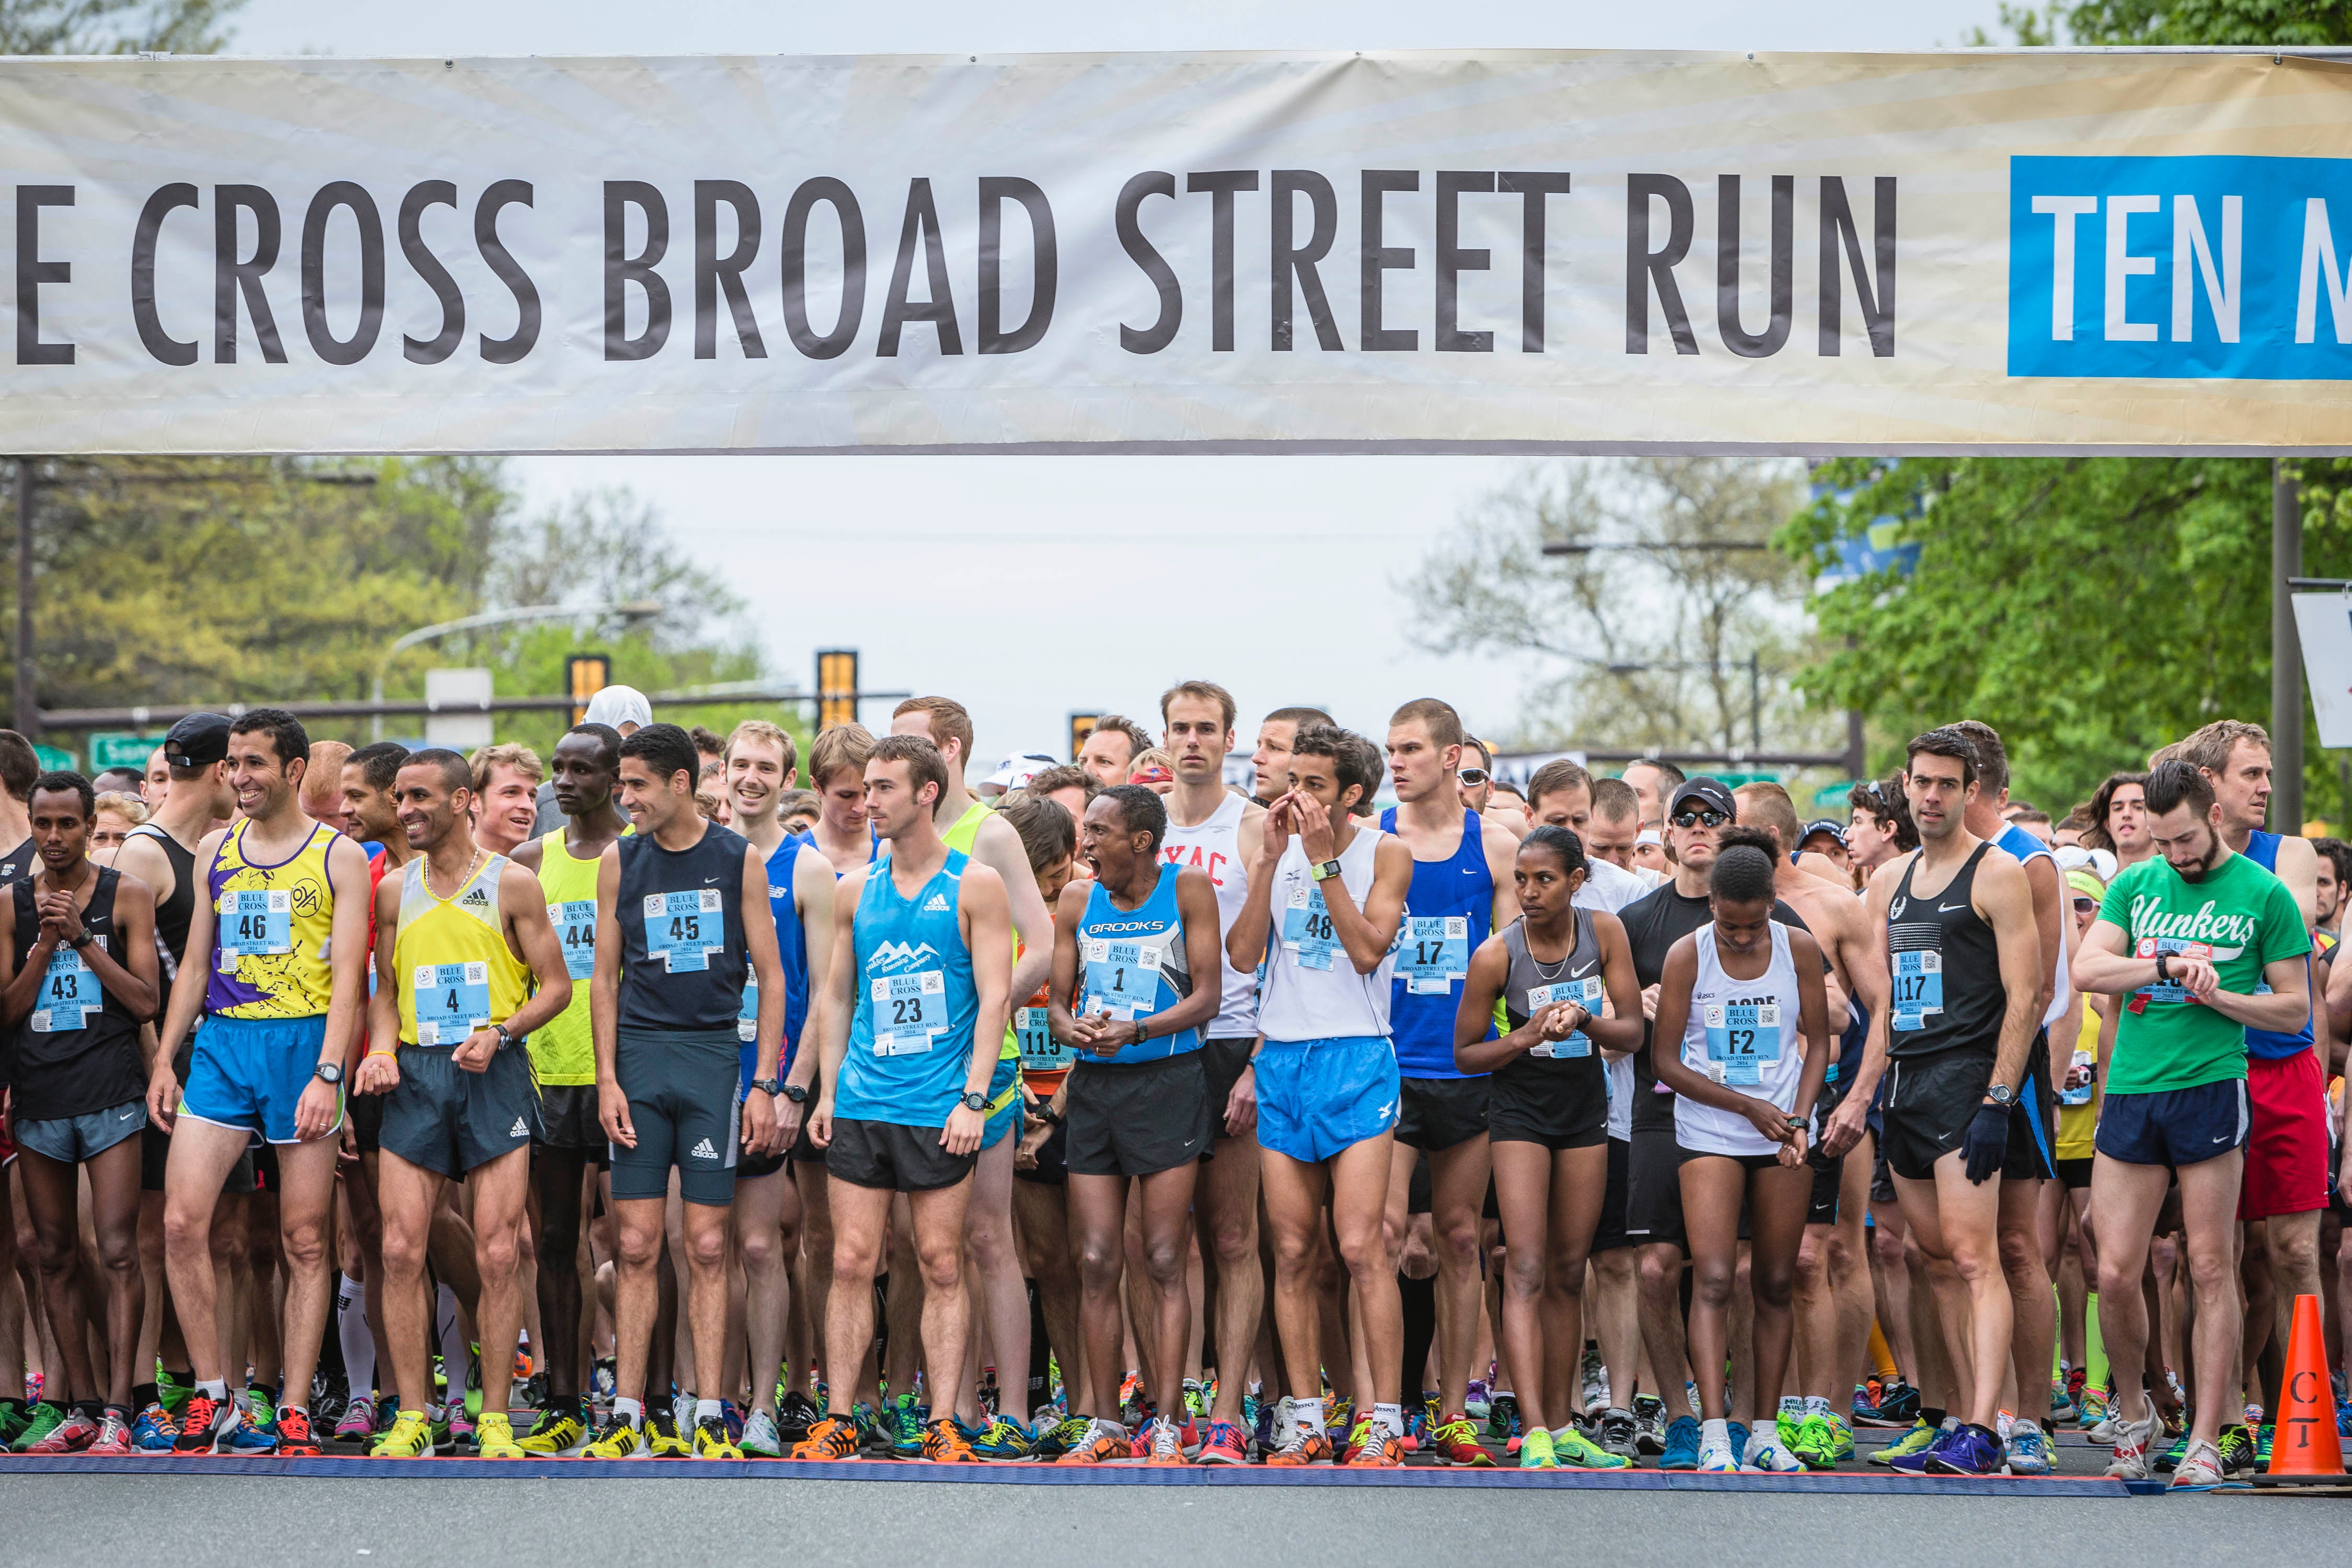 Broad Street Run postponed due to COVID19 concerns WHYY